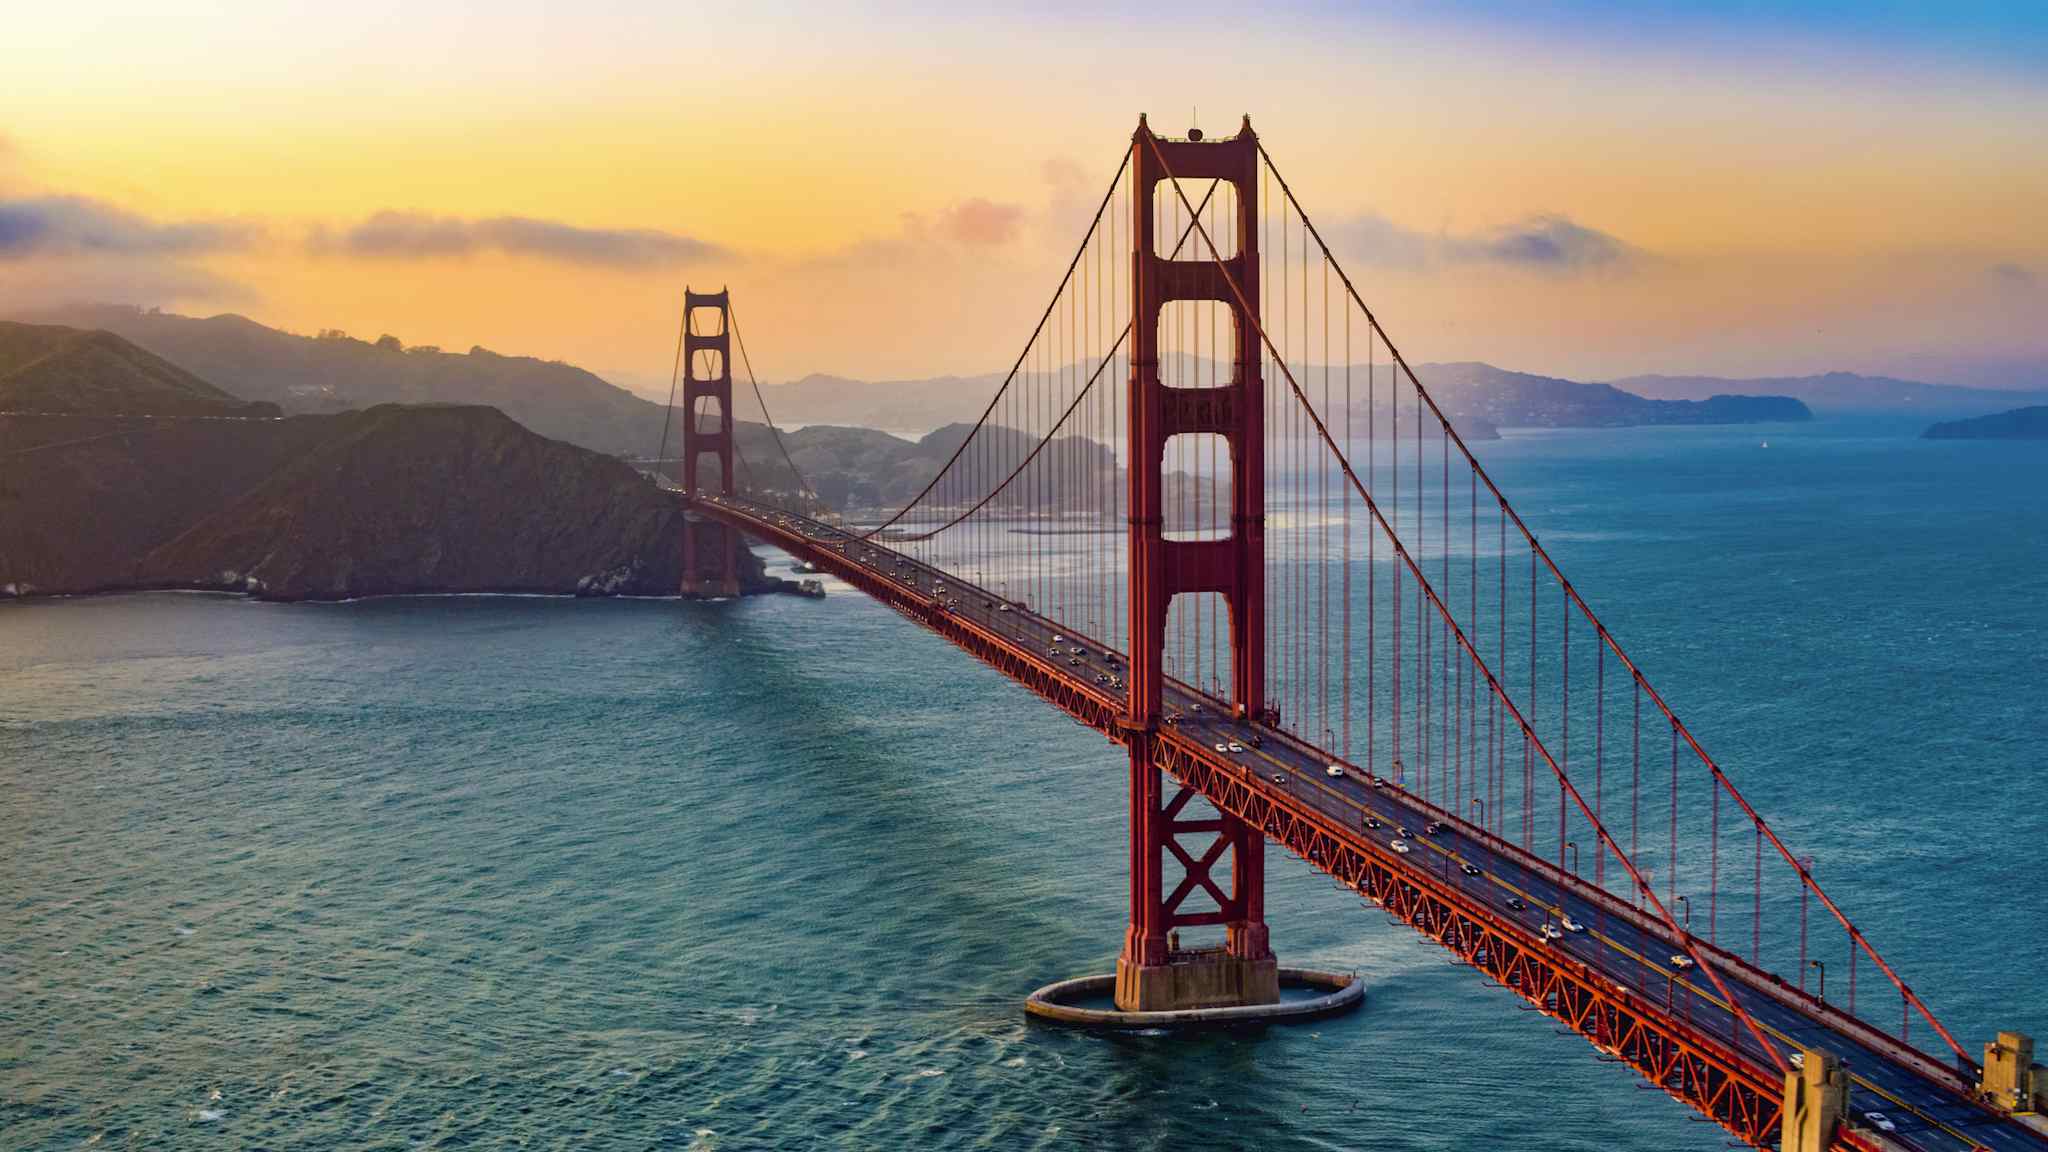 Aerial view of traffic moving on Golden Gate Bridge during sunset, San Francisco, California, USA.
Getty: 1571494714